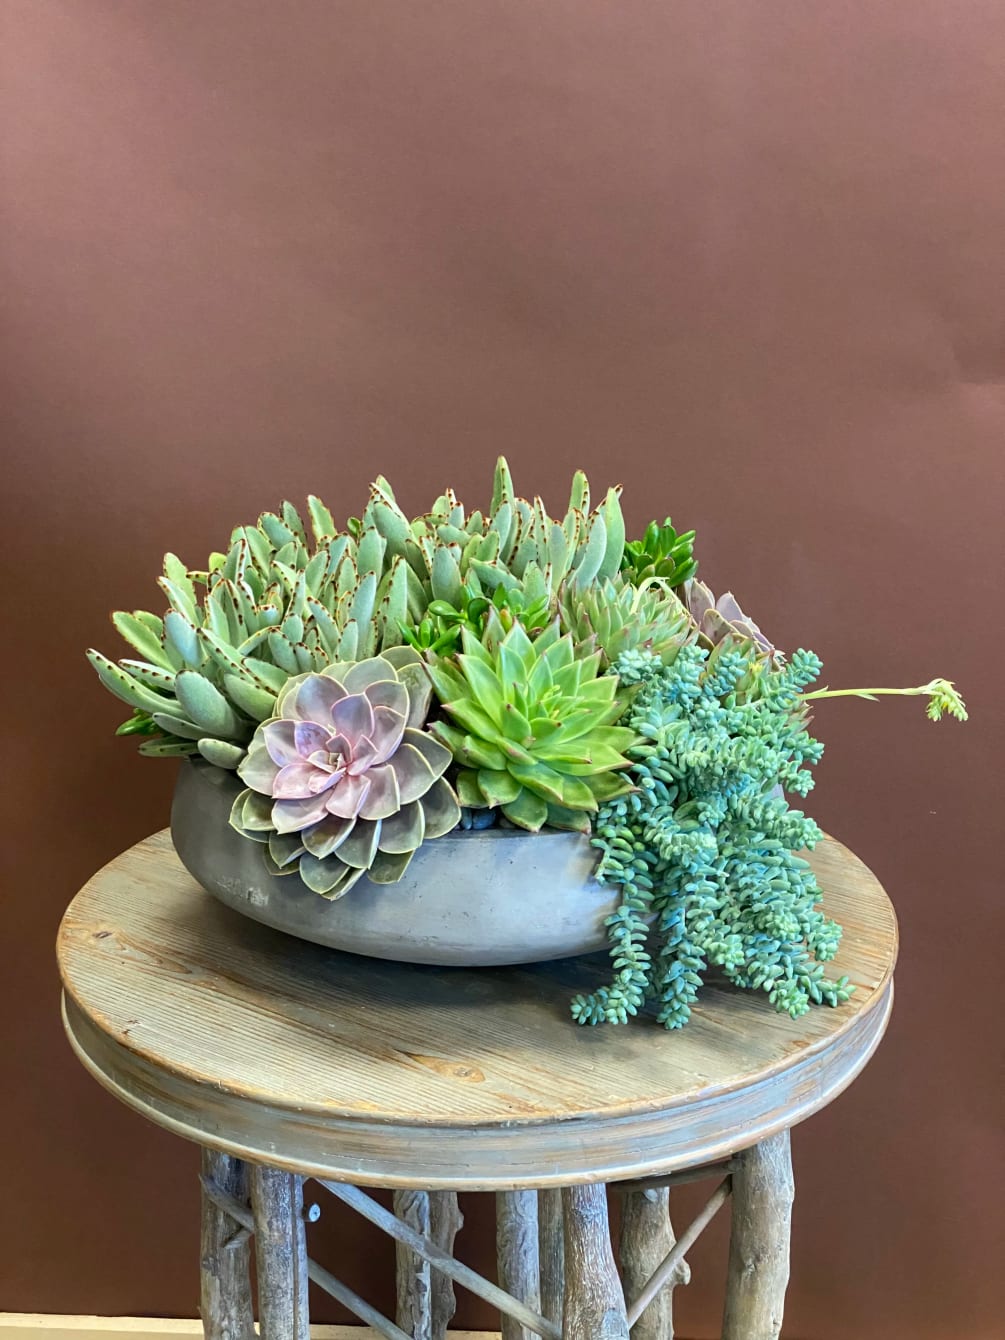 Bring some tranquil to your space. These beautiful arrangement of succulents bring